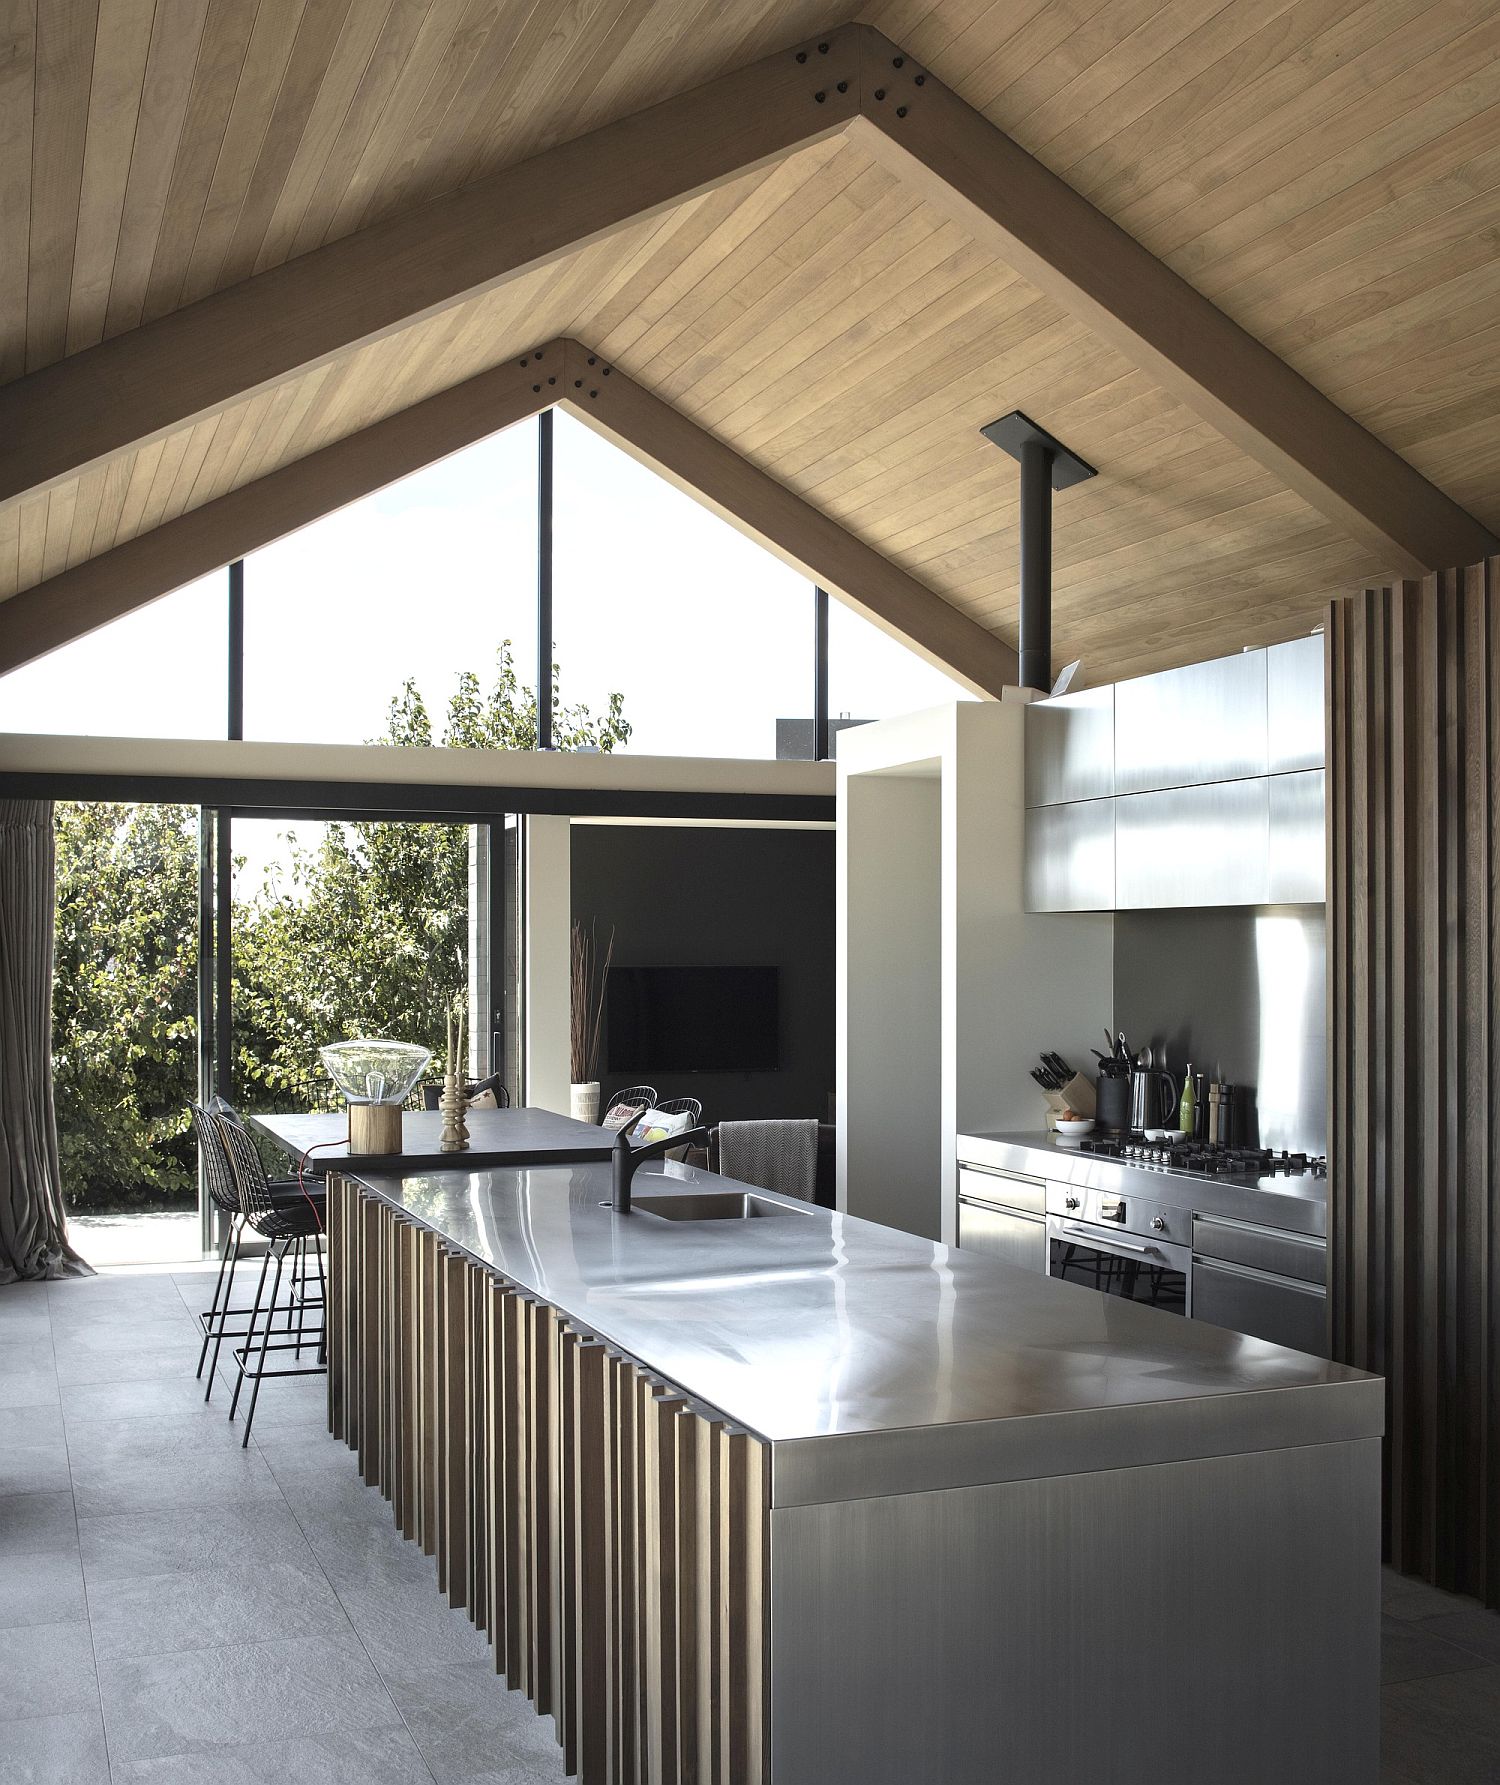 Gray-interior-of-the-kitchen-with-gabled-roof-and-glass-walls-that-bring-light-inside